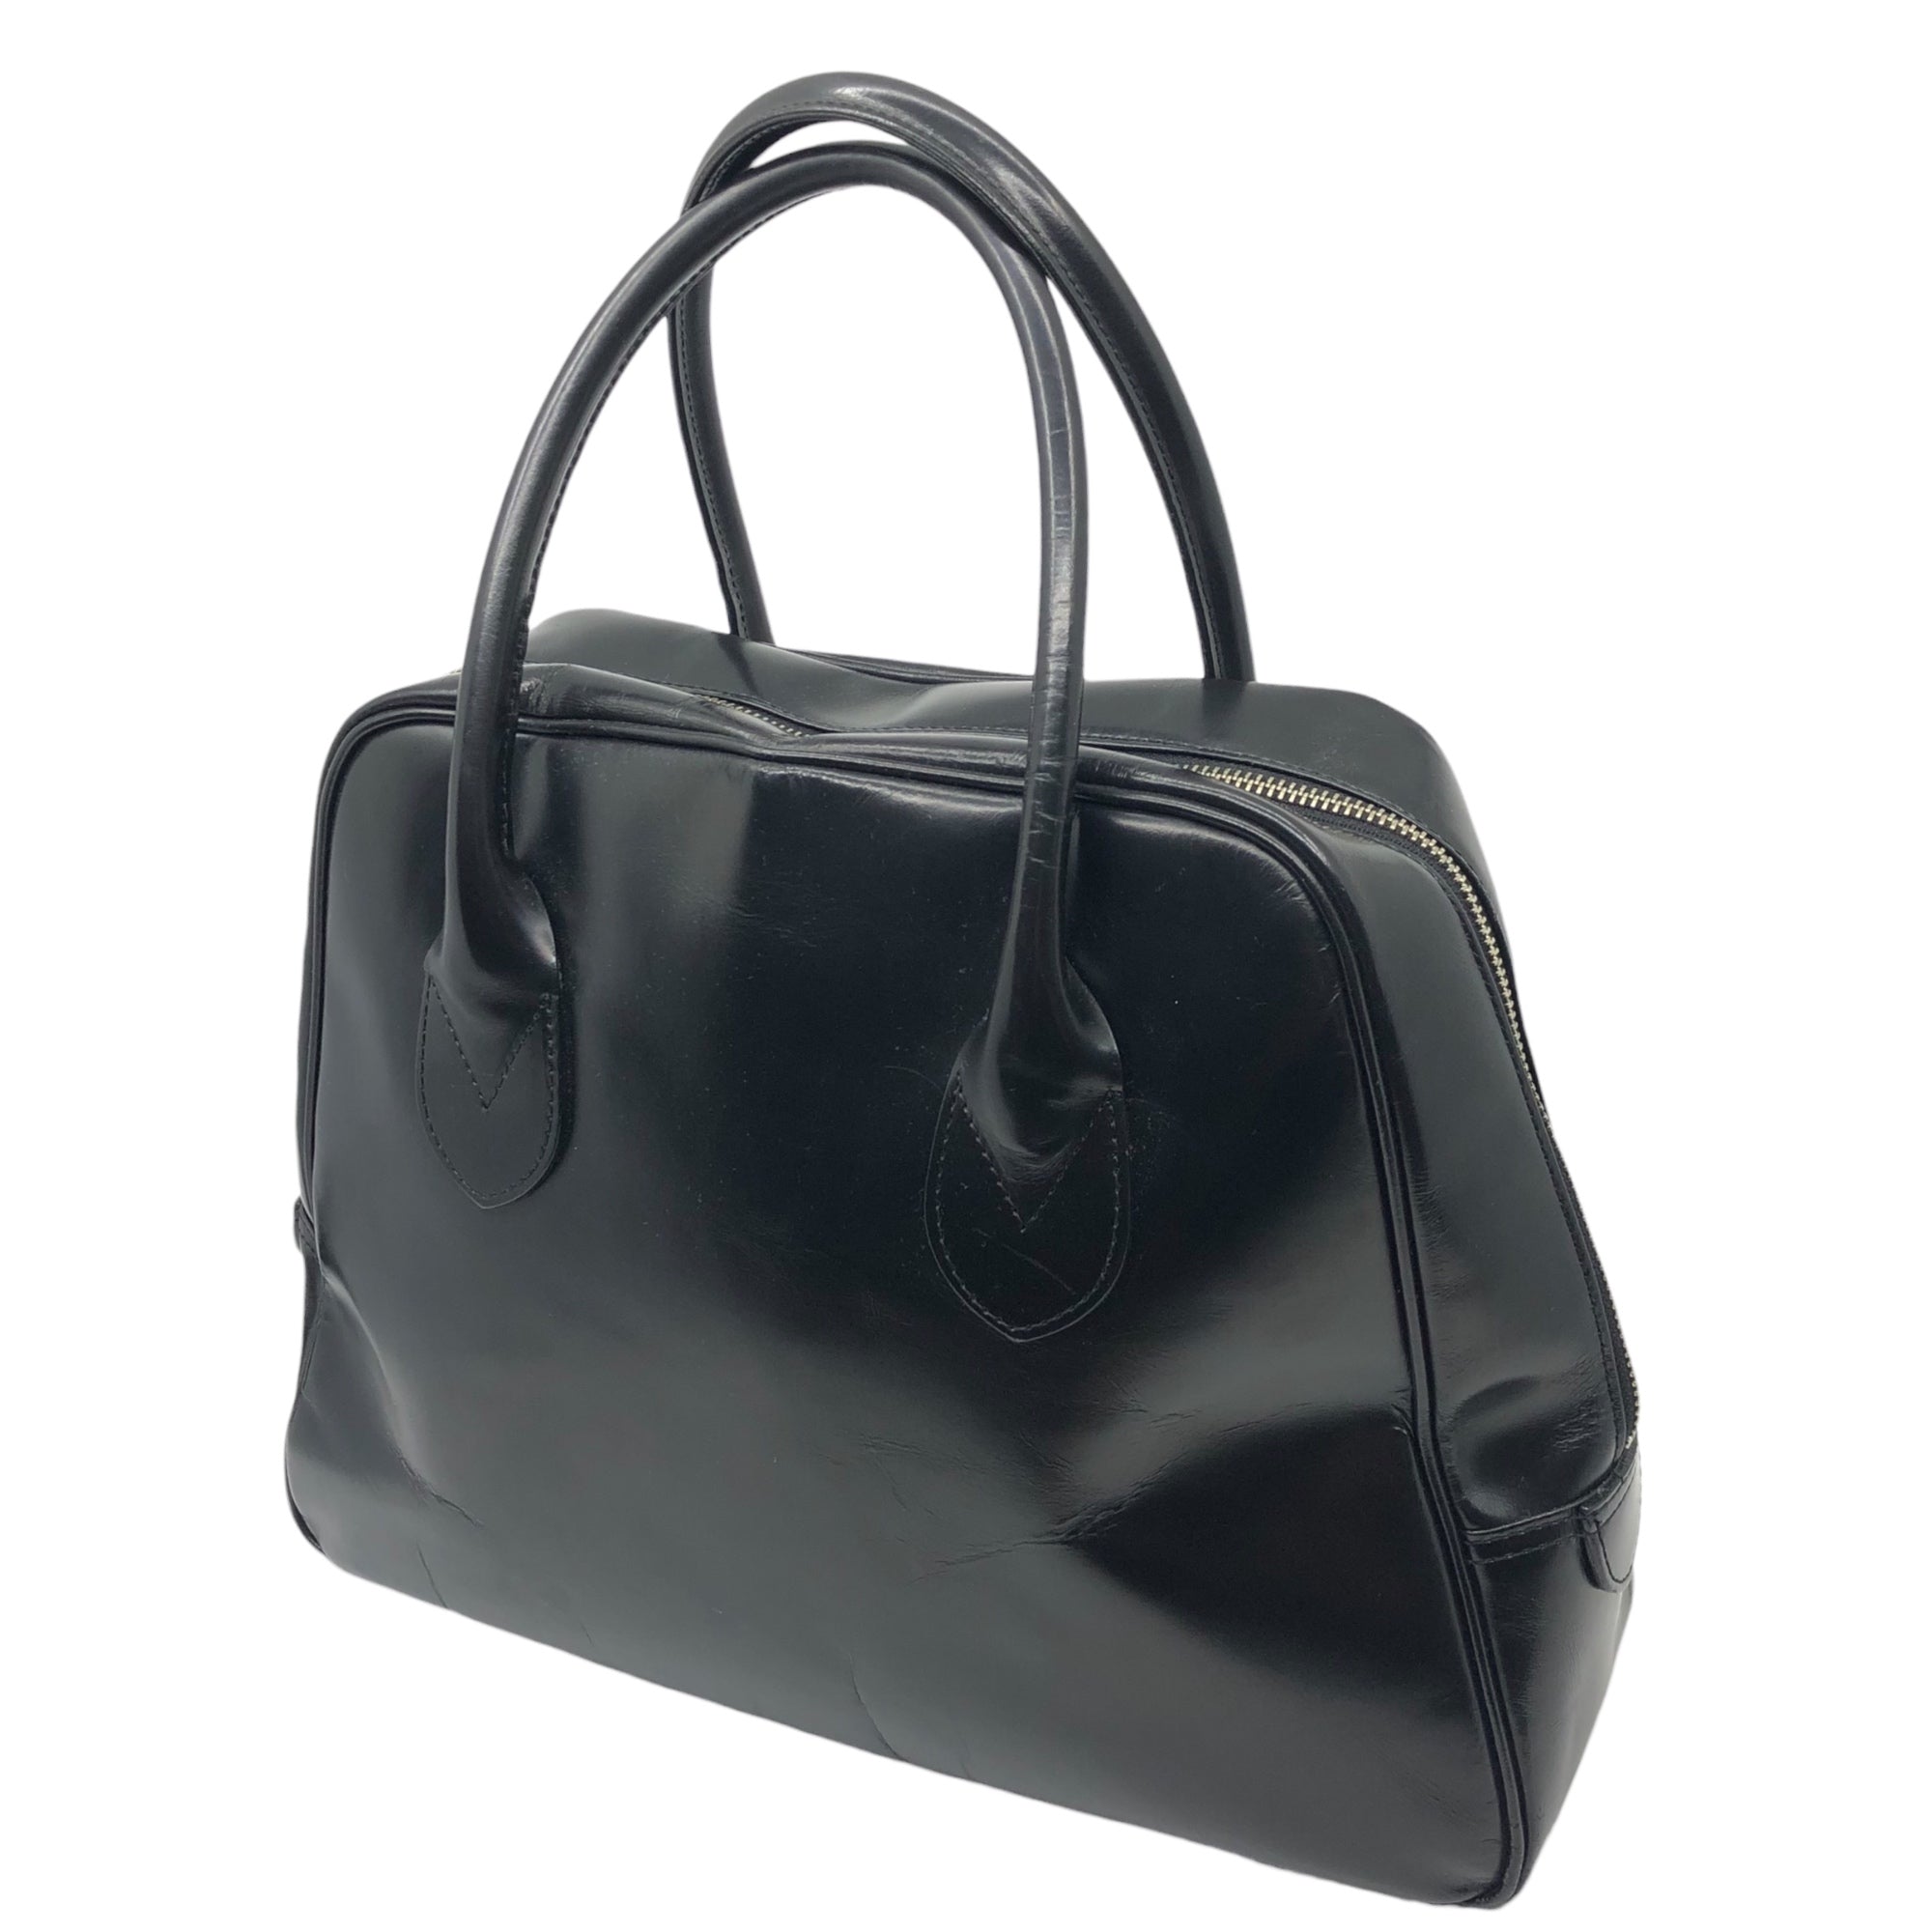 COMME des GARCONS(コムデギャルソン) Aoyama limited leather trapezoid bag 青山限定 レザー台形バッグ 牛革 ブラック